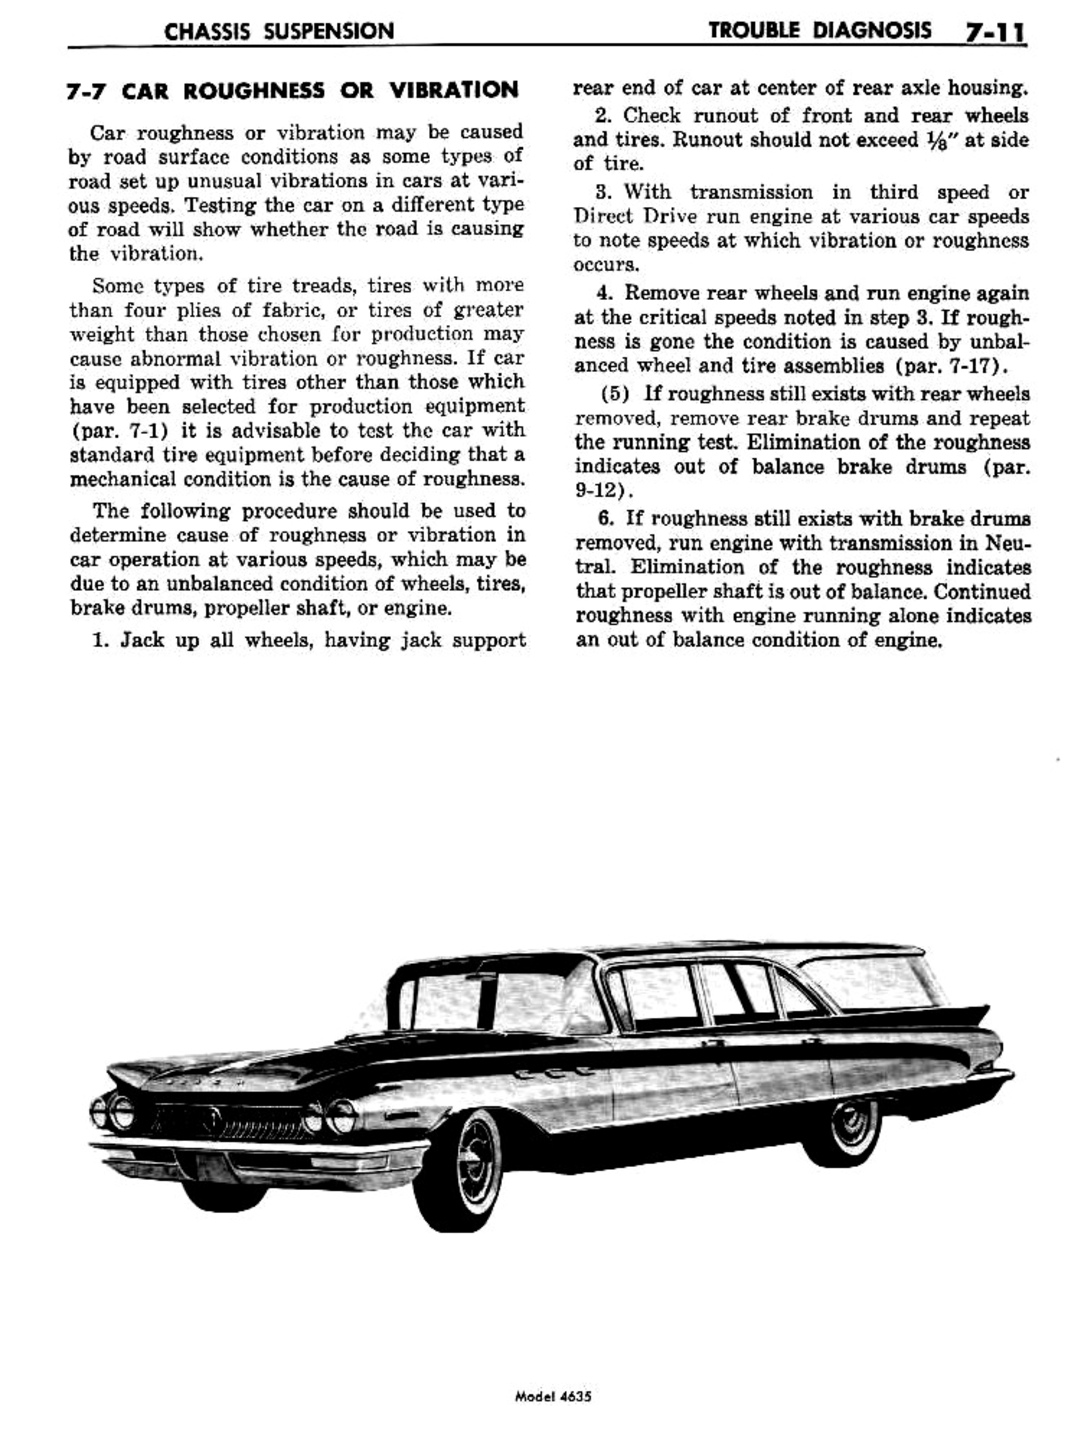 n_08 1960 Buick Shop Manual - Chassis Suspension-011-011.jpg